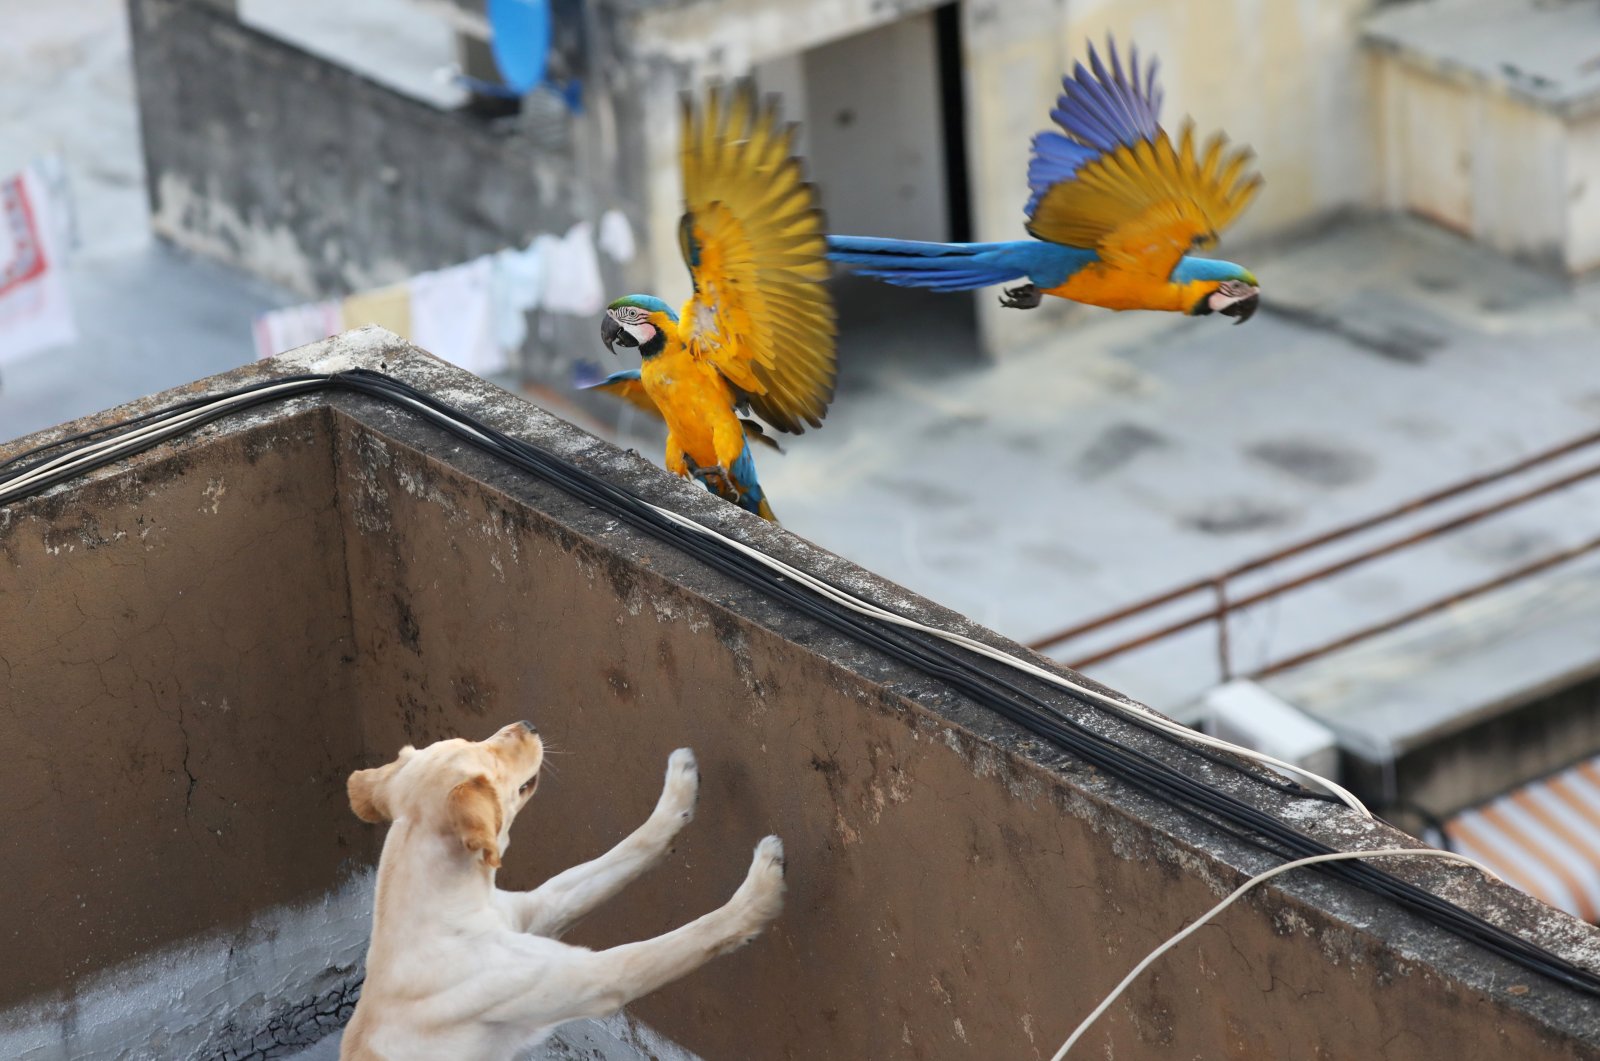 A dog reacts as macaws fly near a rooftop during a nationwide quarantine in Caracas, Venezuela due to the coronavirus outbreak that spread across the world, April 7, 2020. (Reuters Photo)